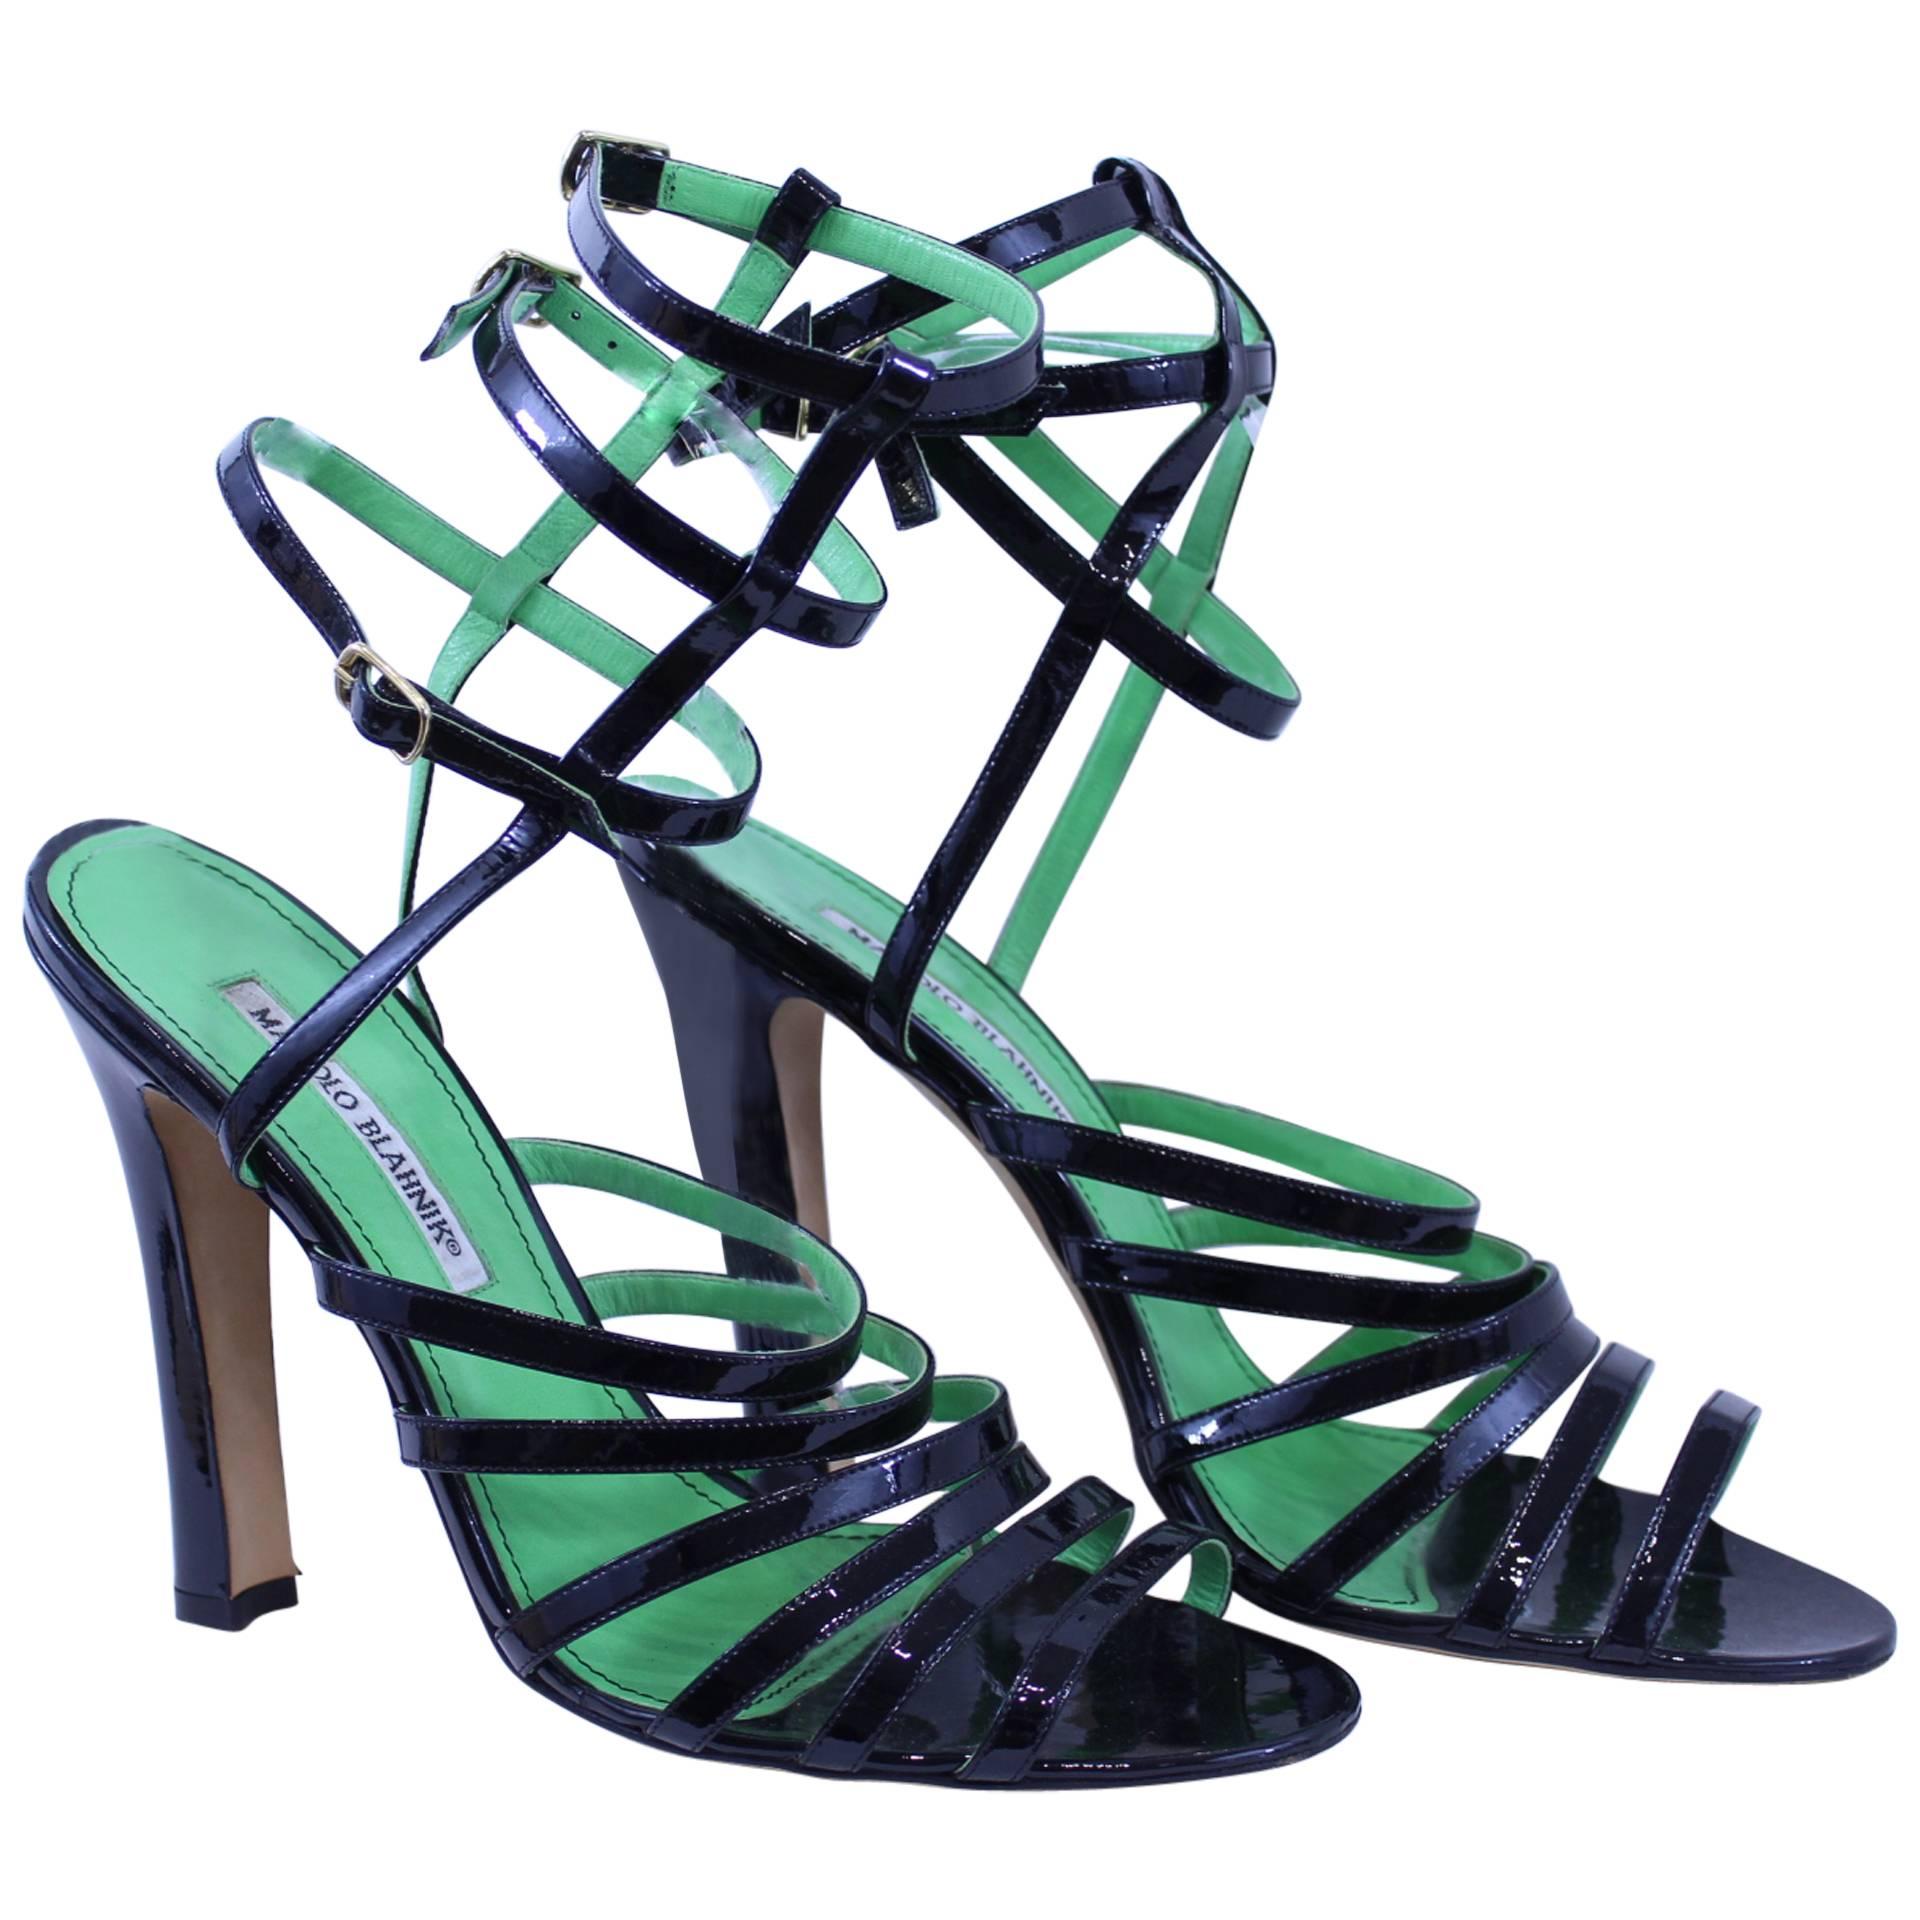 Manolo Blahnik Black and Green Sandals in Patented leather For Sale